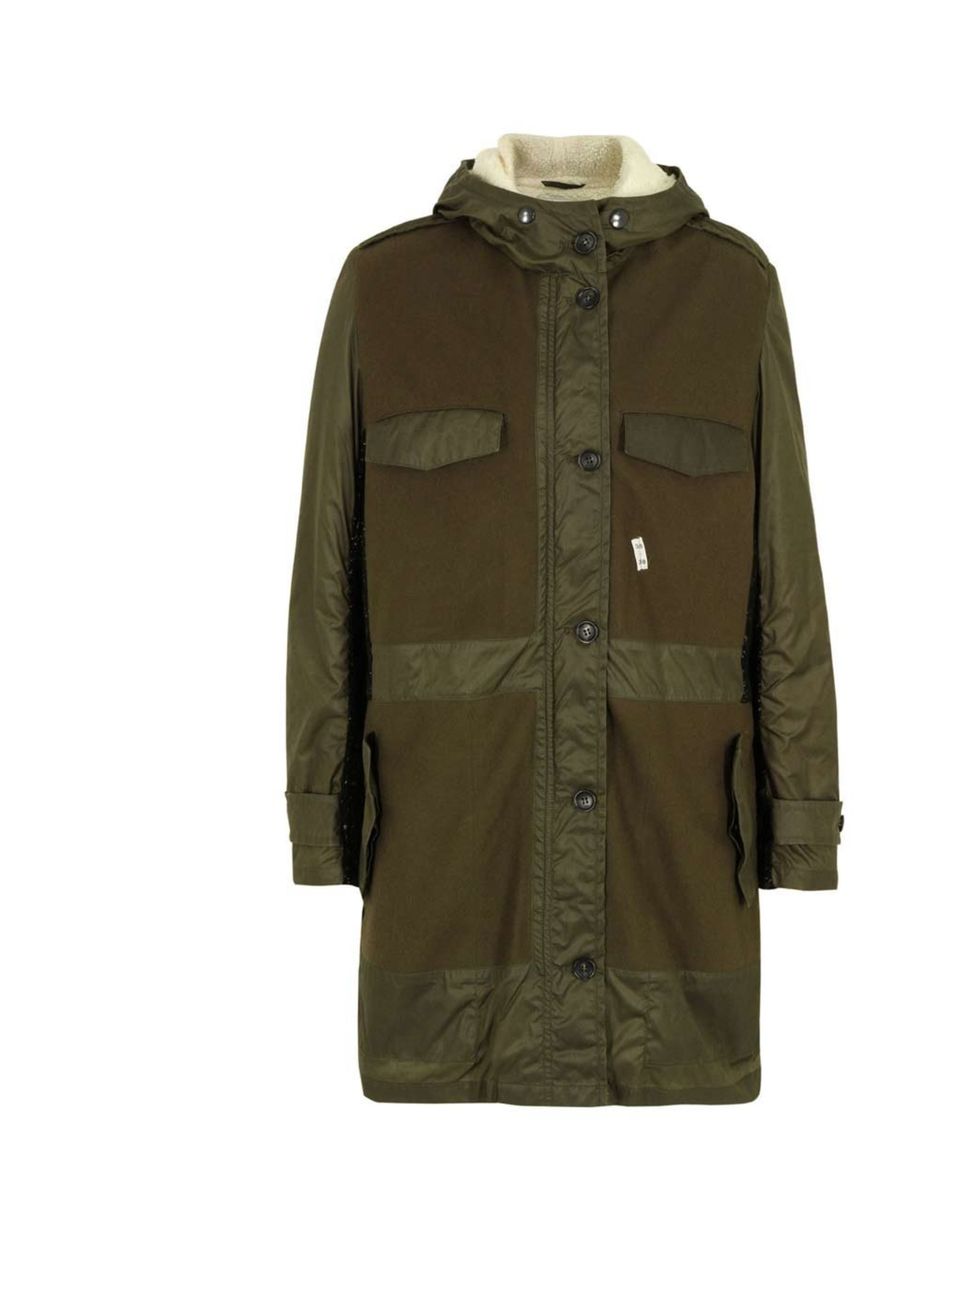 <p>Surface to Air Prezo V2 Olive Parka £500. Available at <a href="http://www.coggles.com/item/Surface-To-Air/Prezo-V2-Olive-Parka/B9A0">Coggles.com</a></p>